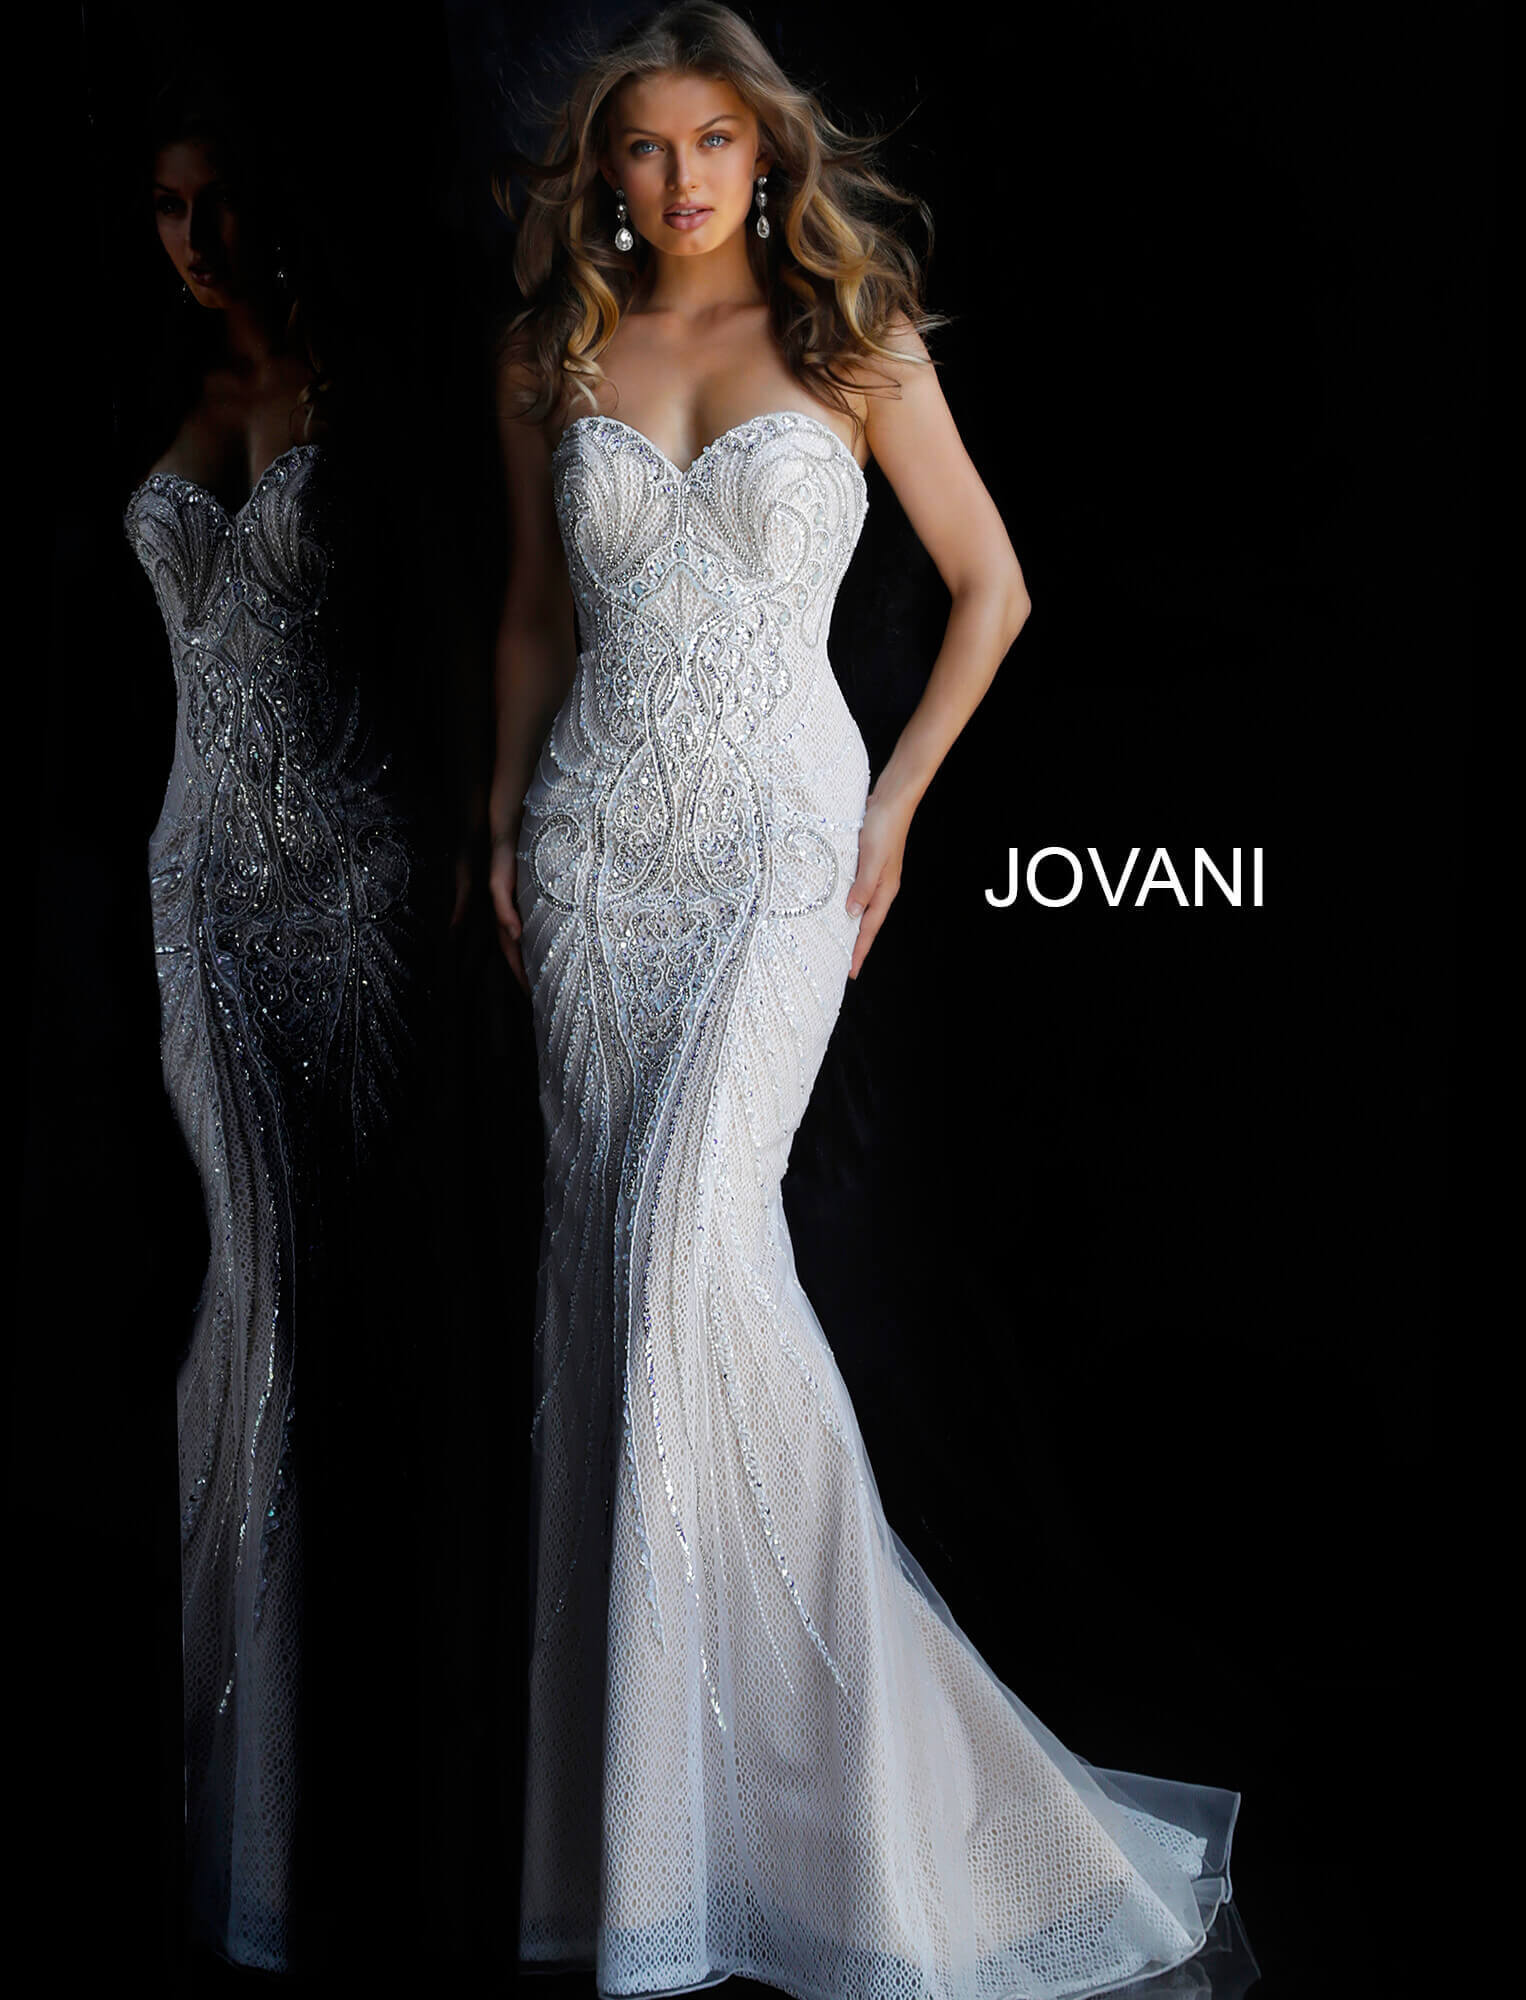 Jovani 45566 is a true stunner! This long Fitted strapless sweetheart neckline features a fully Crystal Embellished and Beaded Vintage Couture Design bodice. Sheer lace underlay. This Wedding Dress is fit for a Goddess. Over the shoulder Crystal embellished Sheer Cape Perfect for cool weather & an magical awe factor. This gown is a true red carpet masterpiece! Fuchsia is a perfect Barbie look for your next Pageant & Is 100% Stage Worthy! 